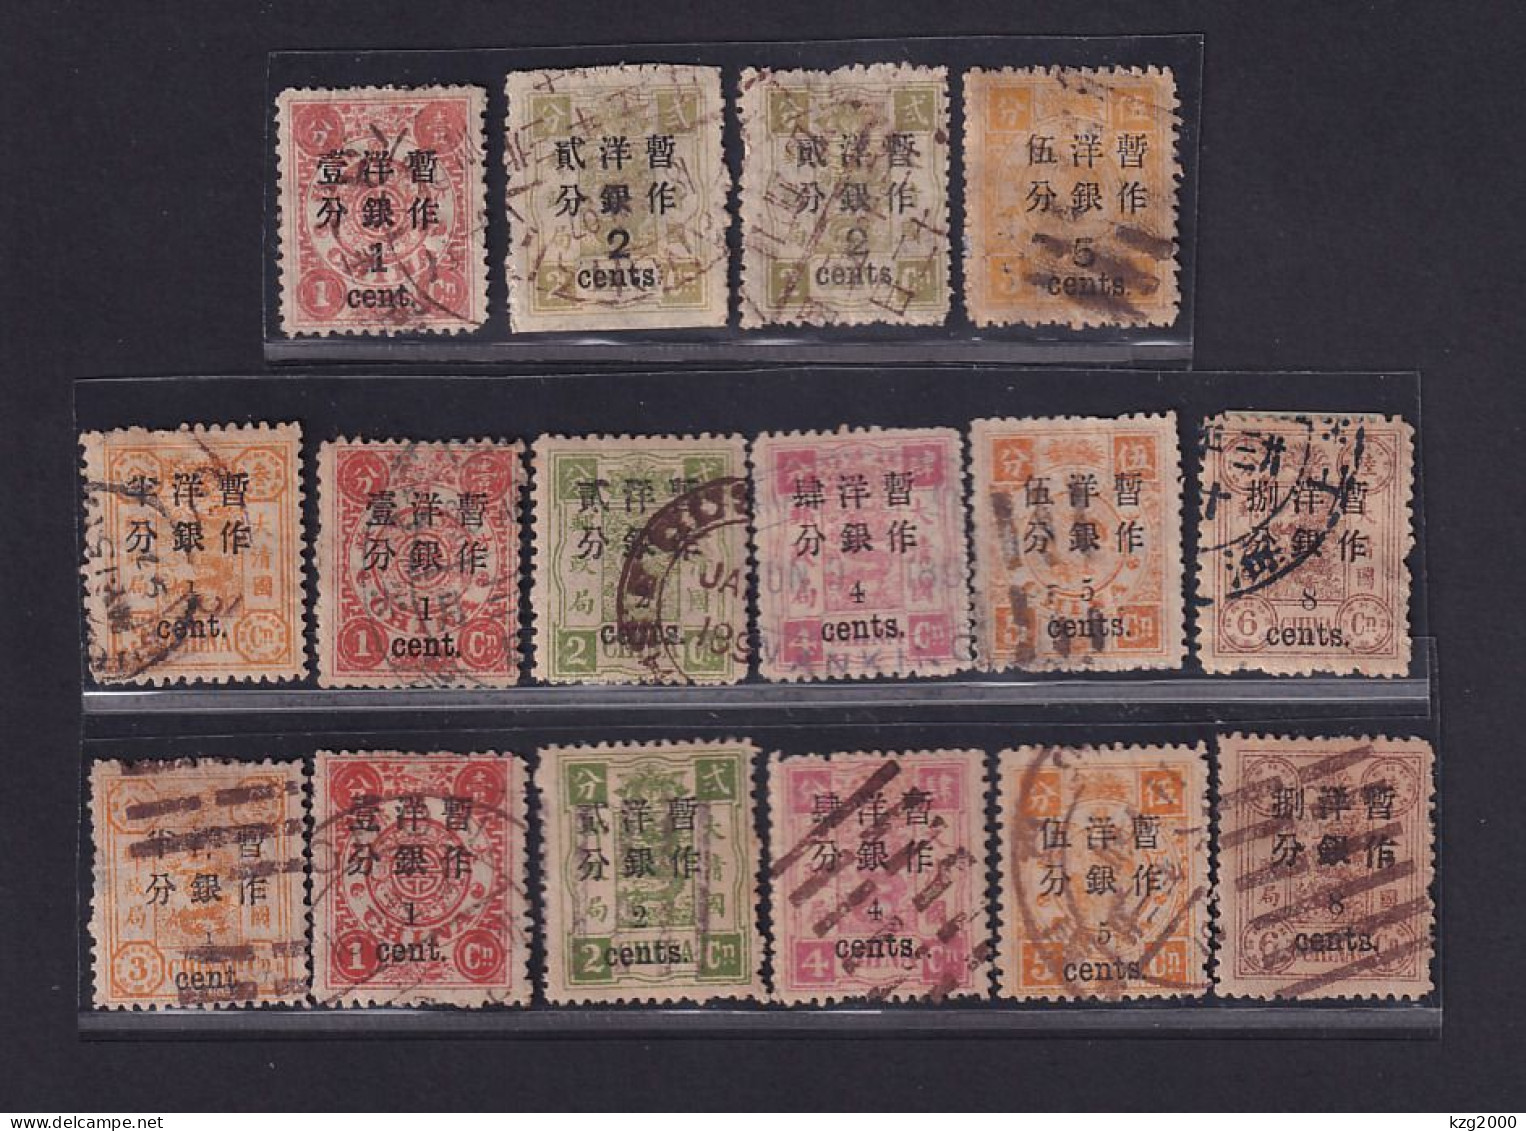 Qing Dynasty China Stamp 1897 Cixi‘s Birthday Commemorative Surcharged 16 Used Stamps - Used Stamps